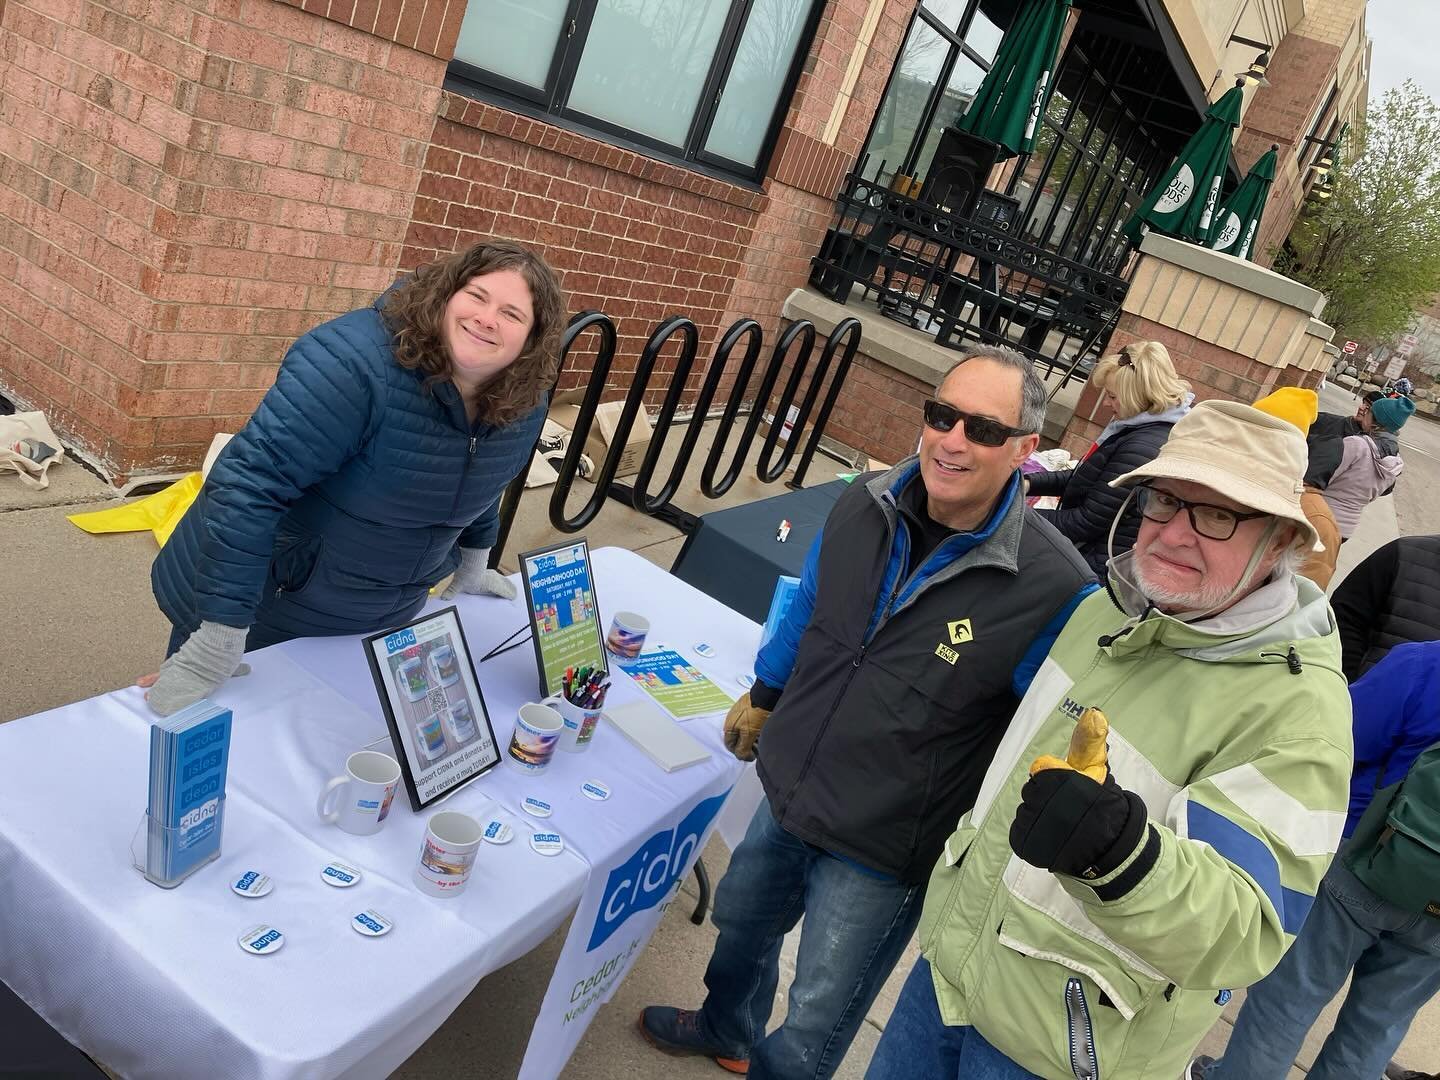 Our second annual Earth Day celebration was a great time! Thank you to everyone who joined us! If you have any pictures from the day, please tag us!
&bull;
&bull;
&bull;
&bull;
&bull; #earthday #ontheedgeofeverything #bdemakaska #westmakaska